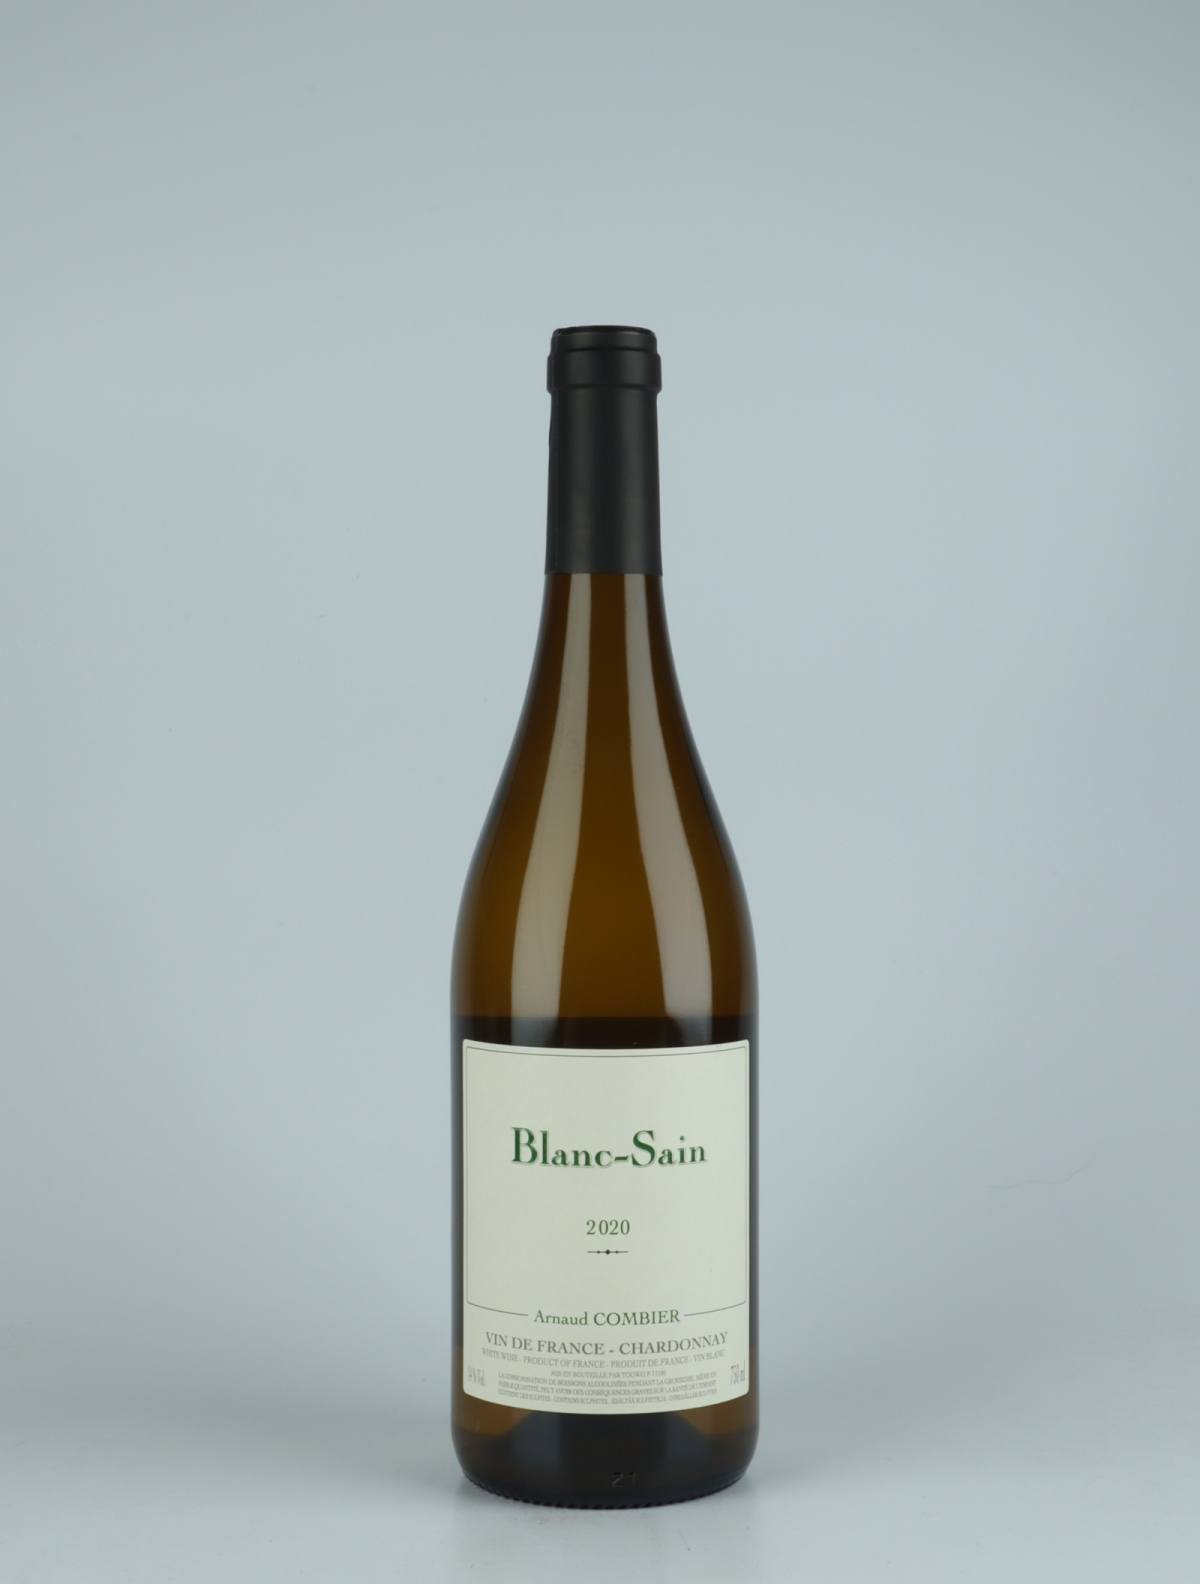 A bottle 2020 Blanc-Sain White wine from Arnaud Combier, Beaujolais in France